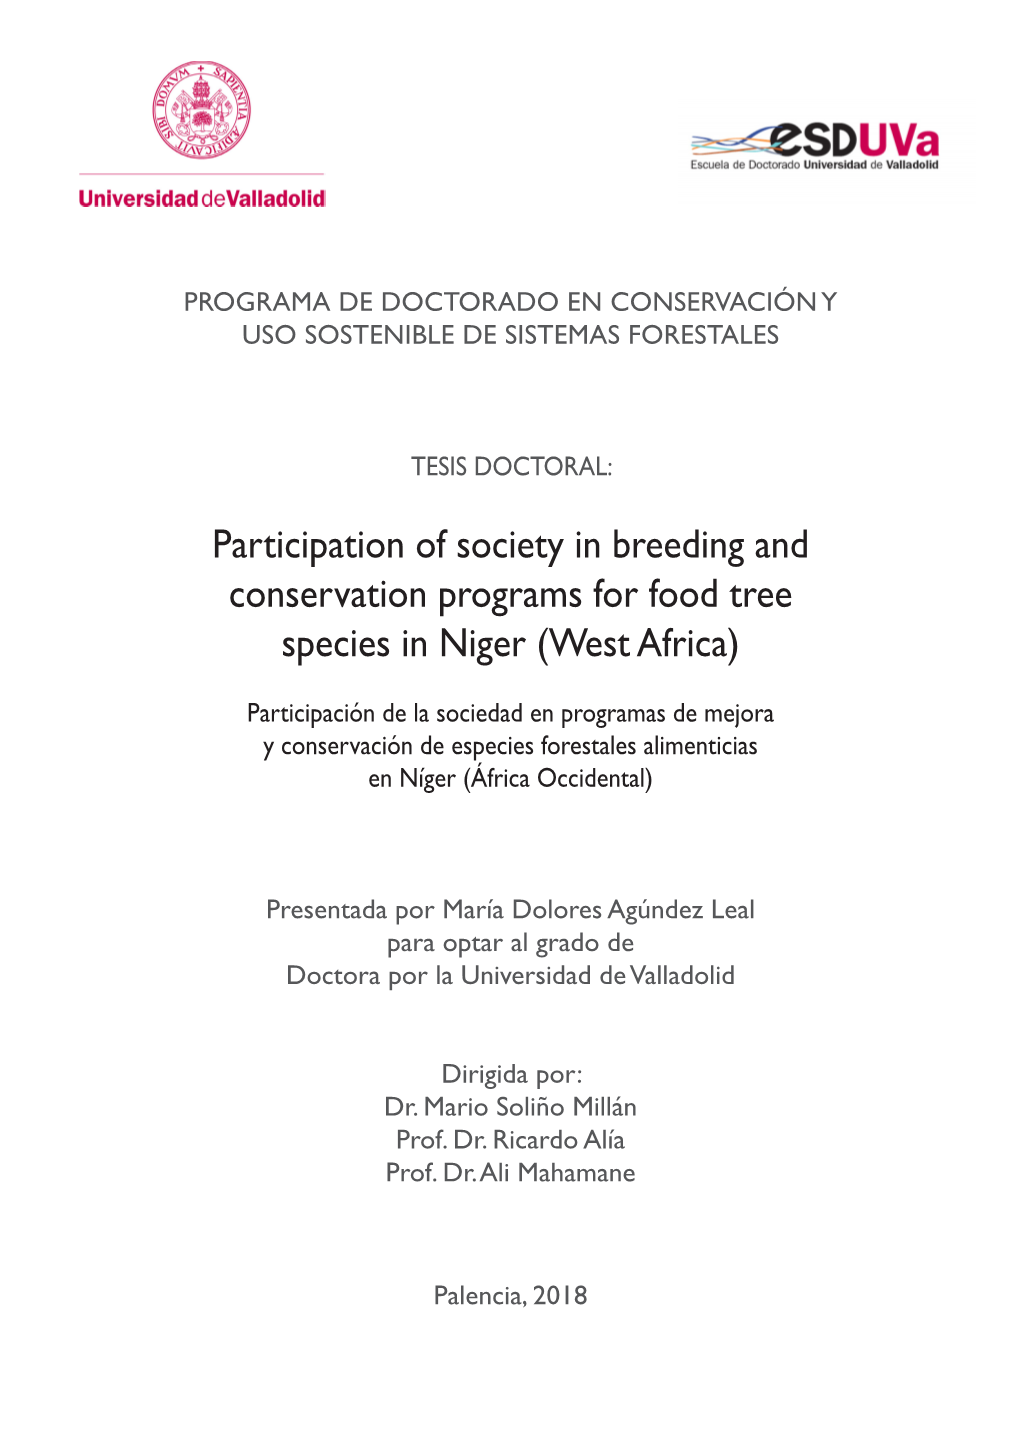 Participation of Society in Breeding and Conservation Programs for Food Tree Species in Niger (West Africa)